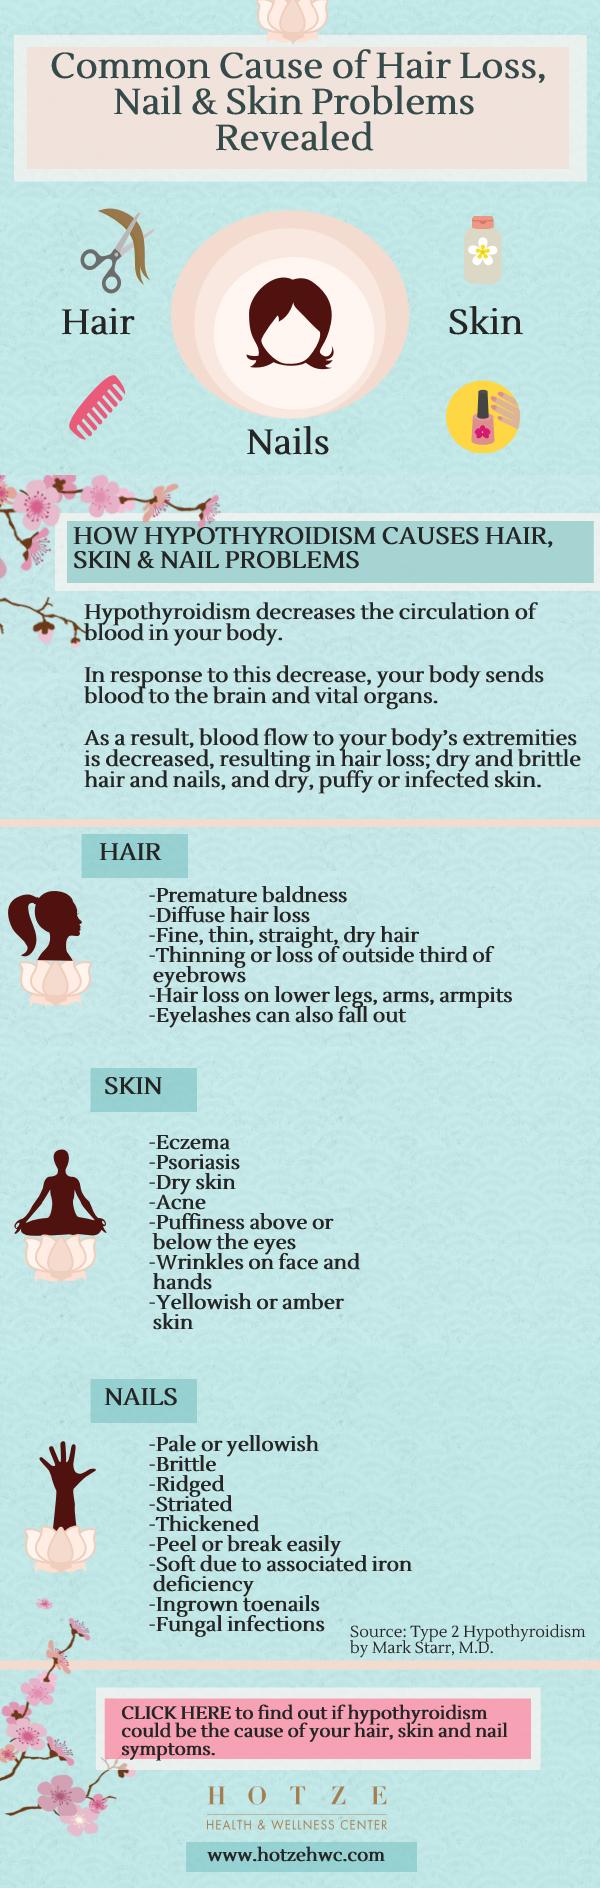 Common Cause of Hair Loss, Nail & Skin Problems Revealed